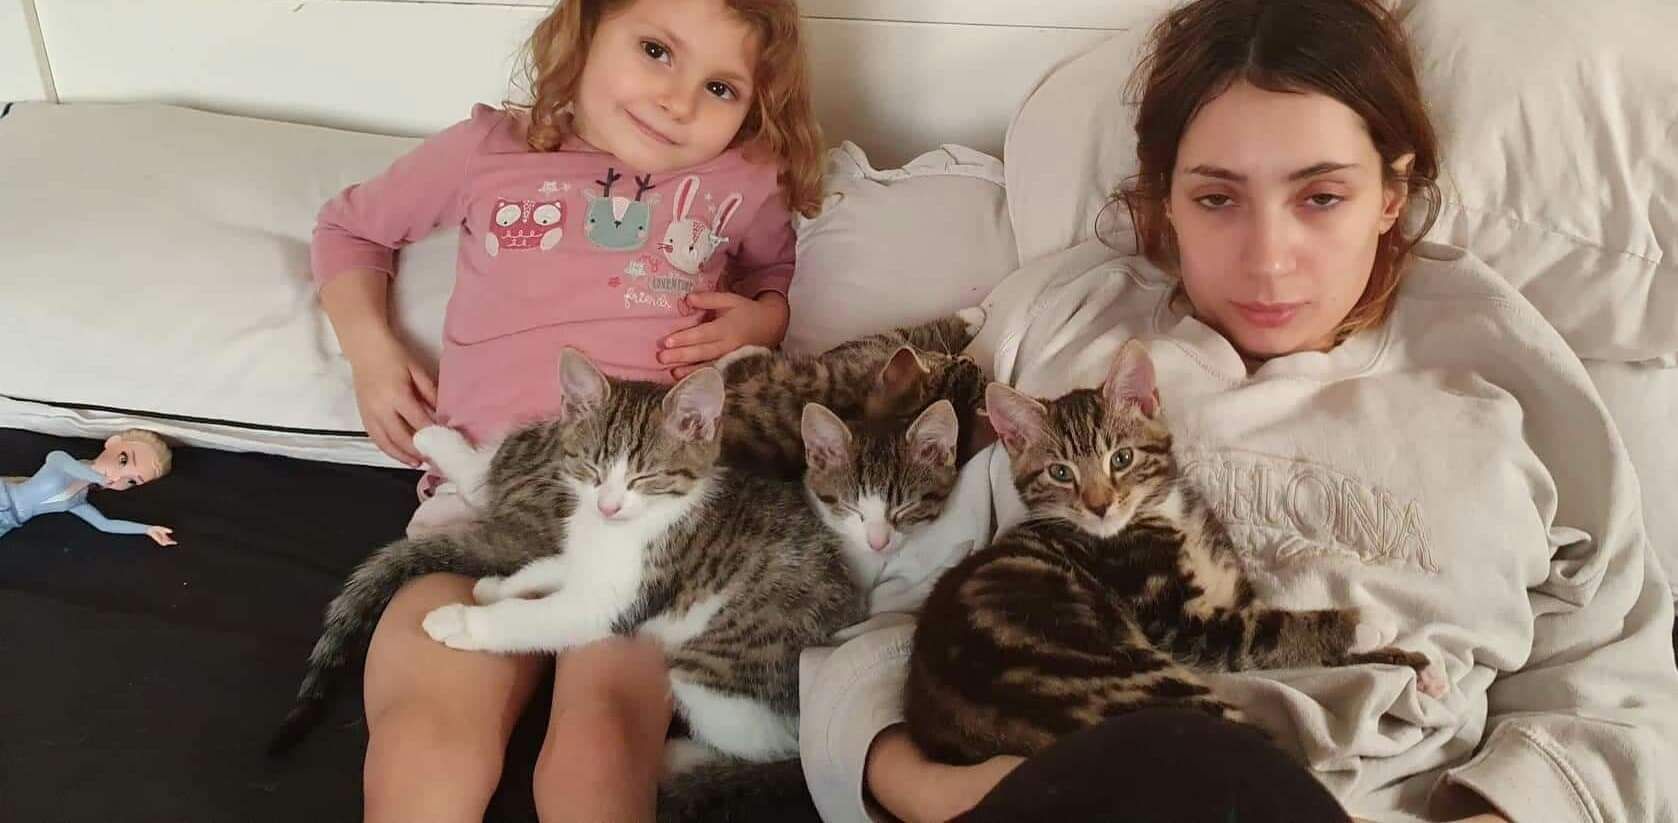 Asked my friend how her lockdown was going having dealt with a fresh litter of 4 cats and and a lively 3 year old.. this was the response I got. Face says it all.